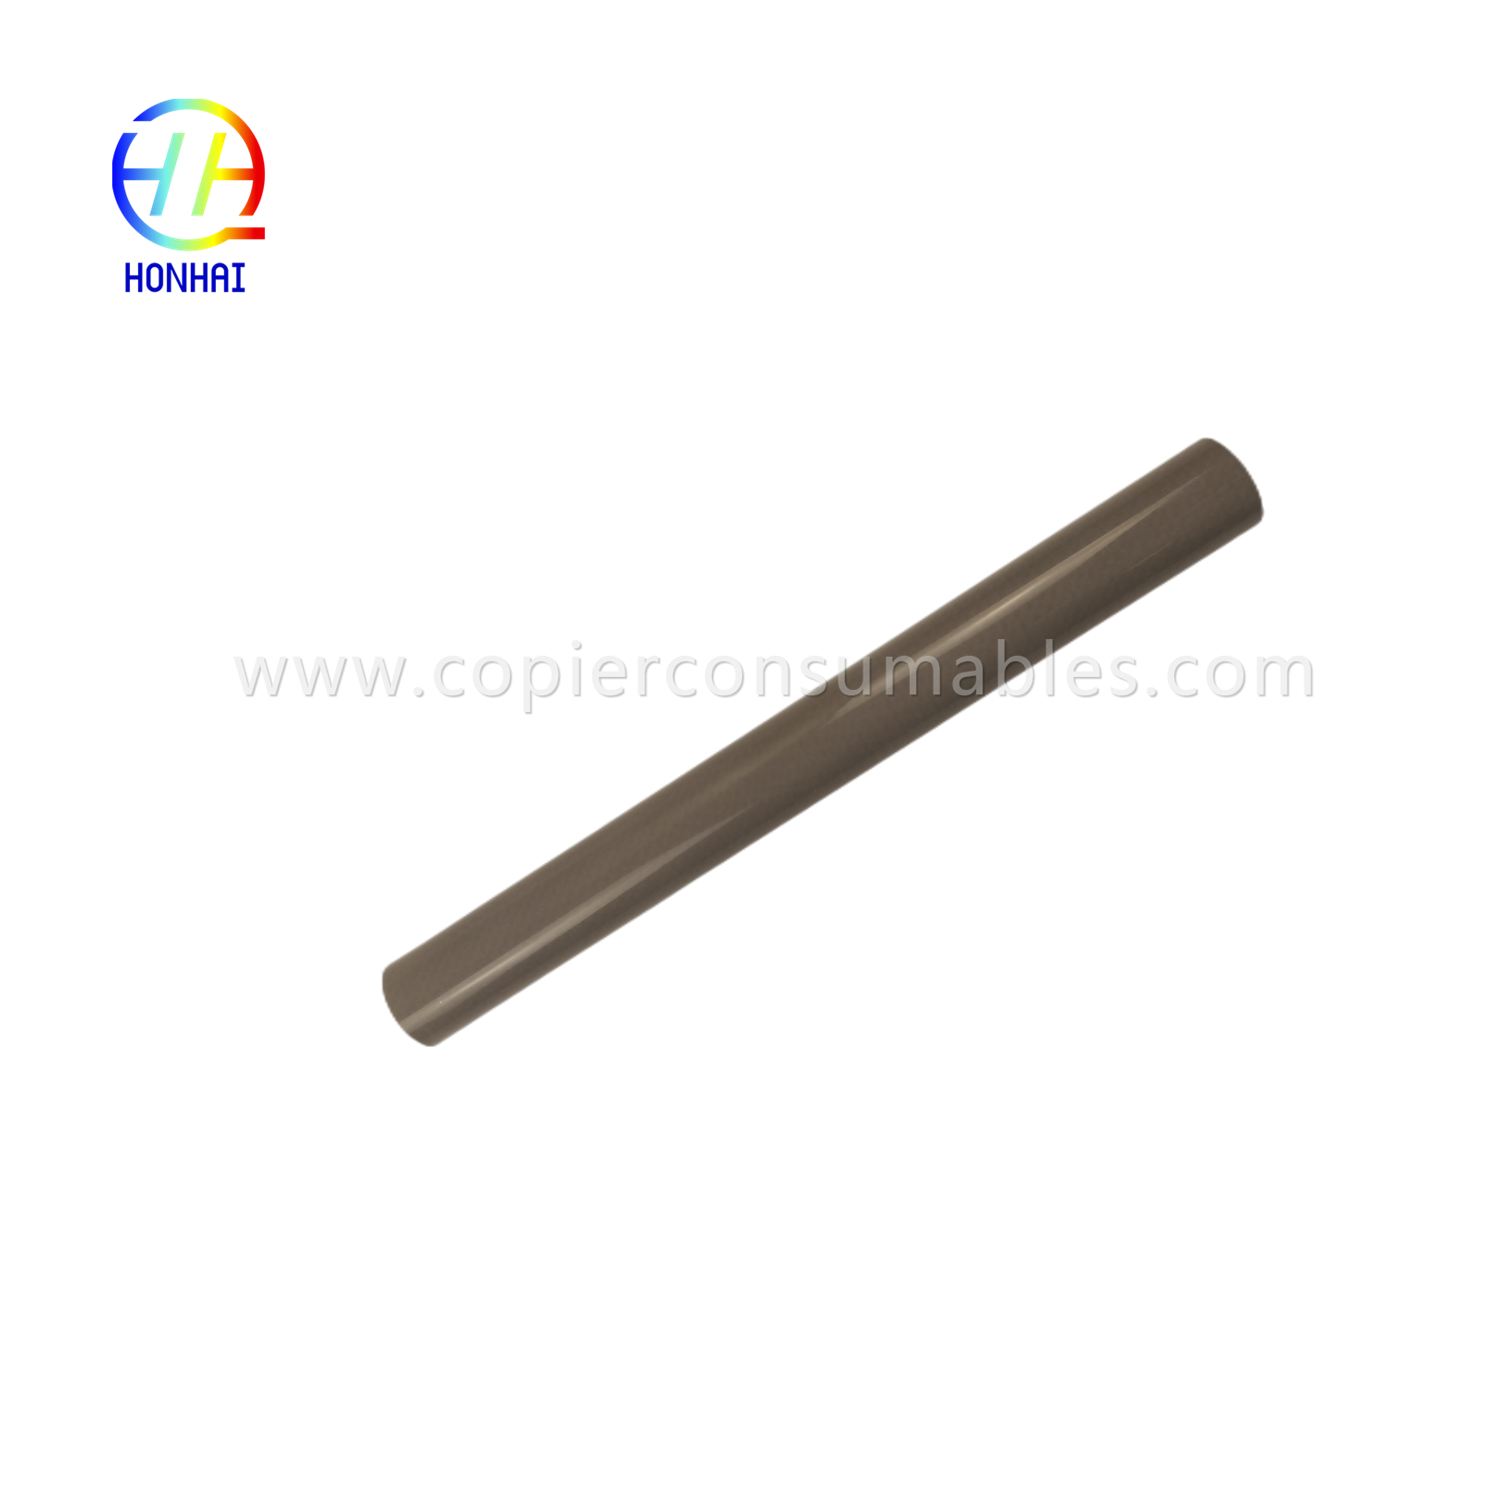 https://www.copierconsumables.com/fuser-film-sleeve-for-samsung-scx-8230na-8240na-8030nd-8040nd-clx920192519301-jc66-03102a-fuser-belt-product/